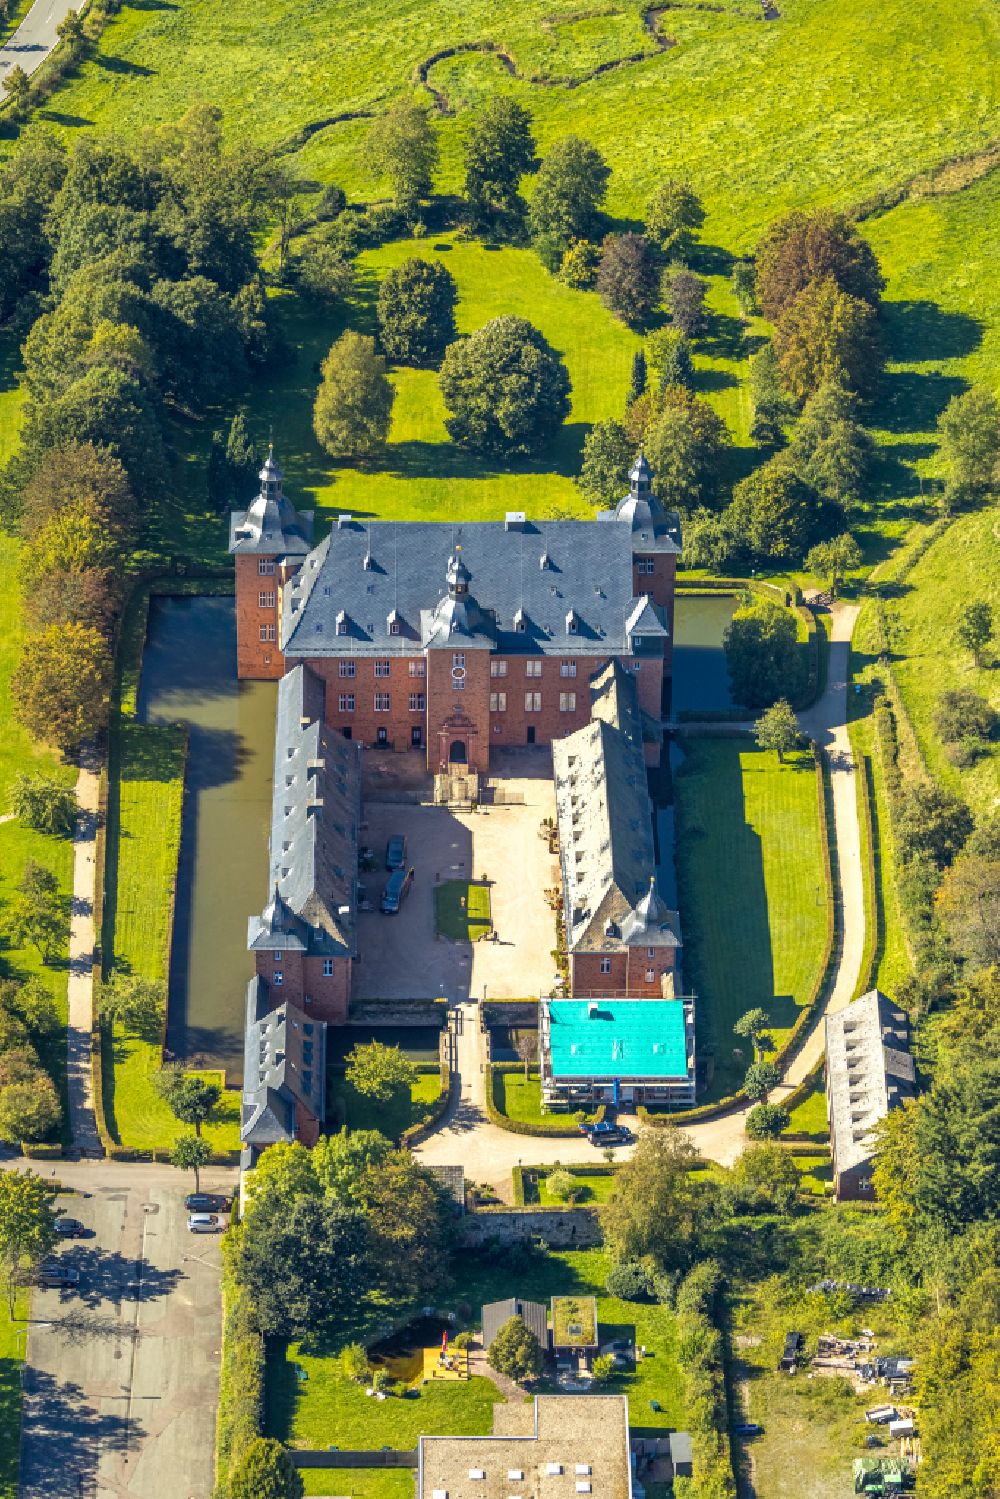 Kirchhundem from the bird's eye view: Castle Adolfsburg in the borough of Kirchhundem in the state of North Rhine-Westphalia. The water castle is located in the Oberhundem part of the borough and was built in the 1670s as a recreational manor. It is renowned for its western front with the two towers. The u-shaped compound also includes an elaborate courtyard and a park